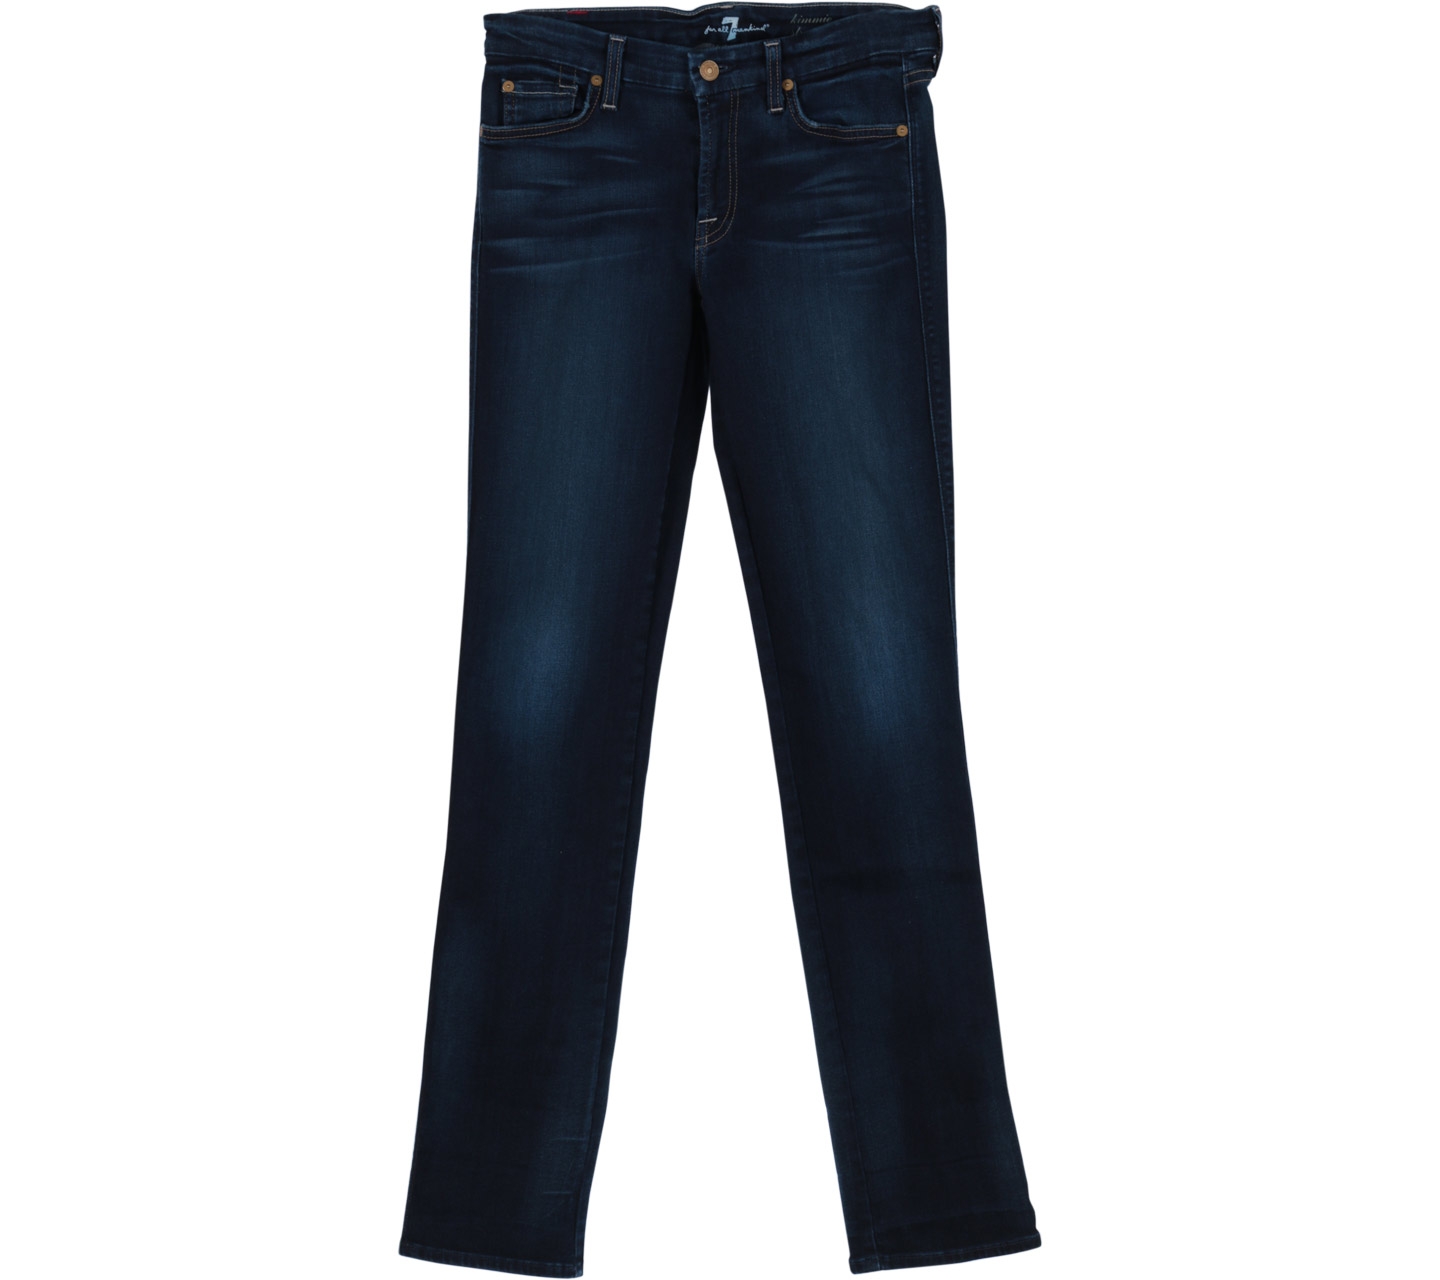 7 For All Mankind Blue Jeans Pants